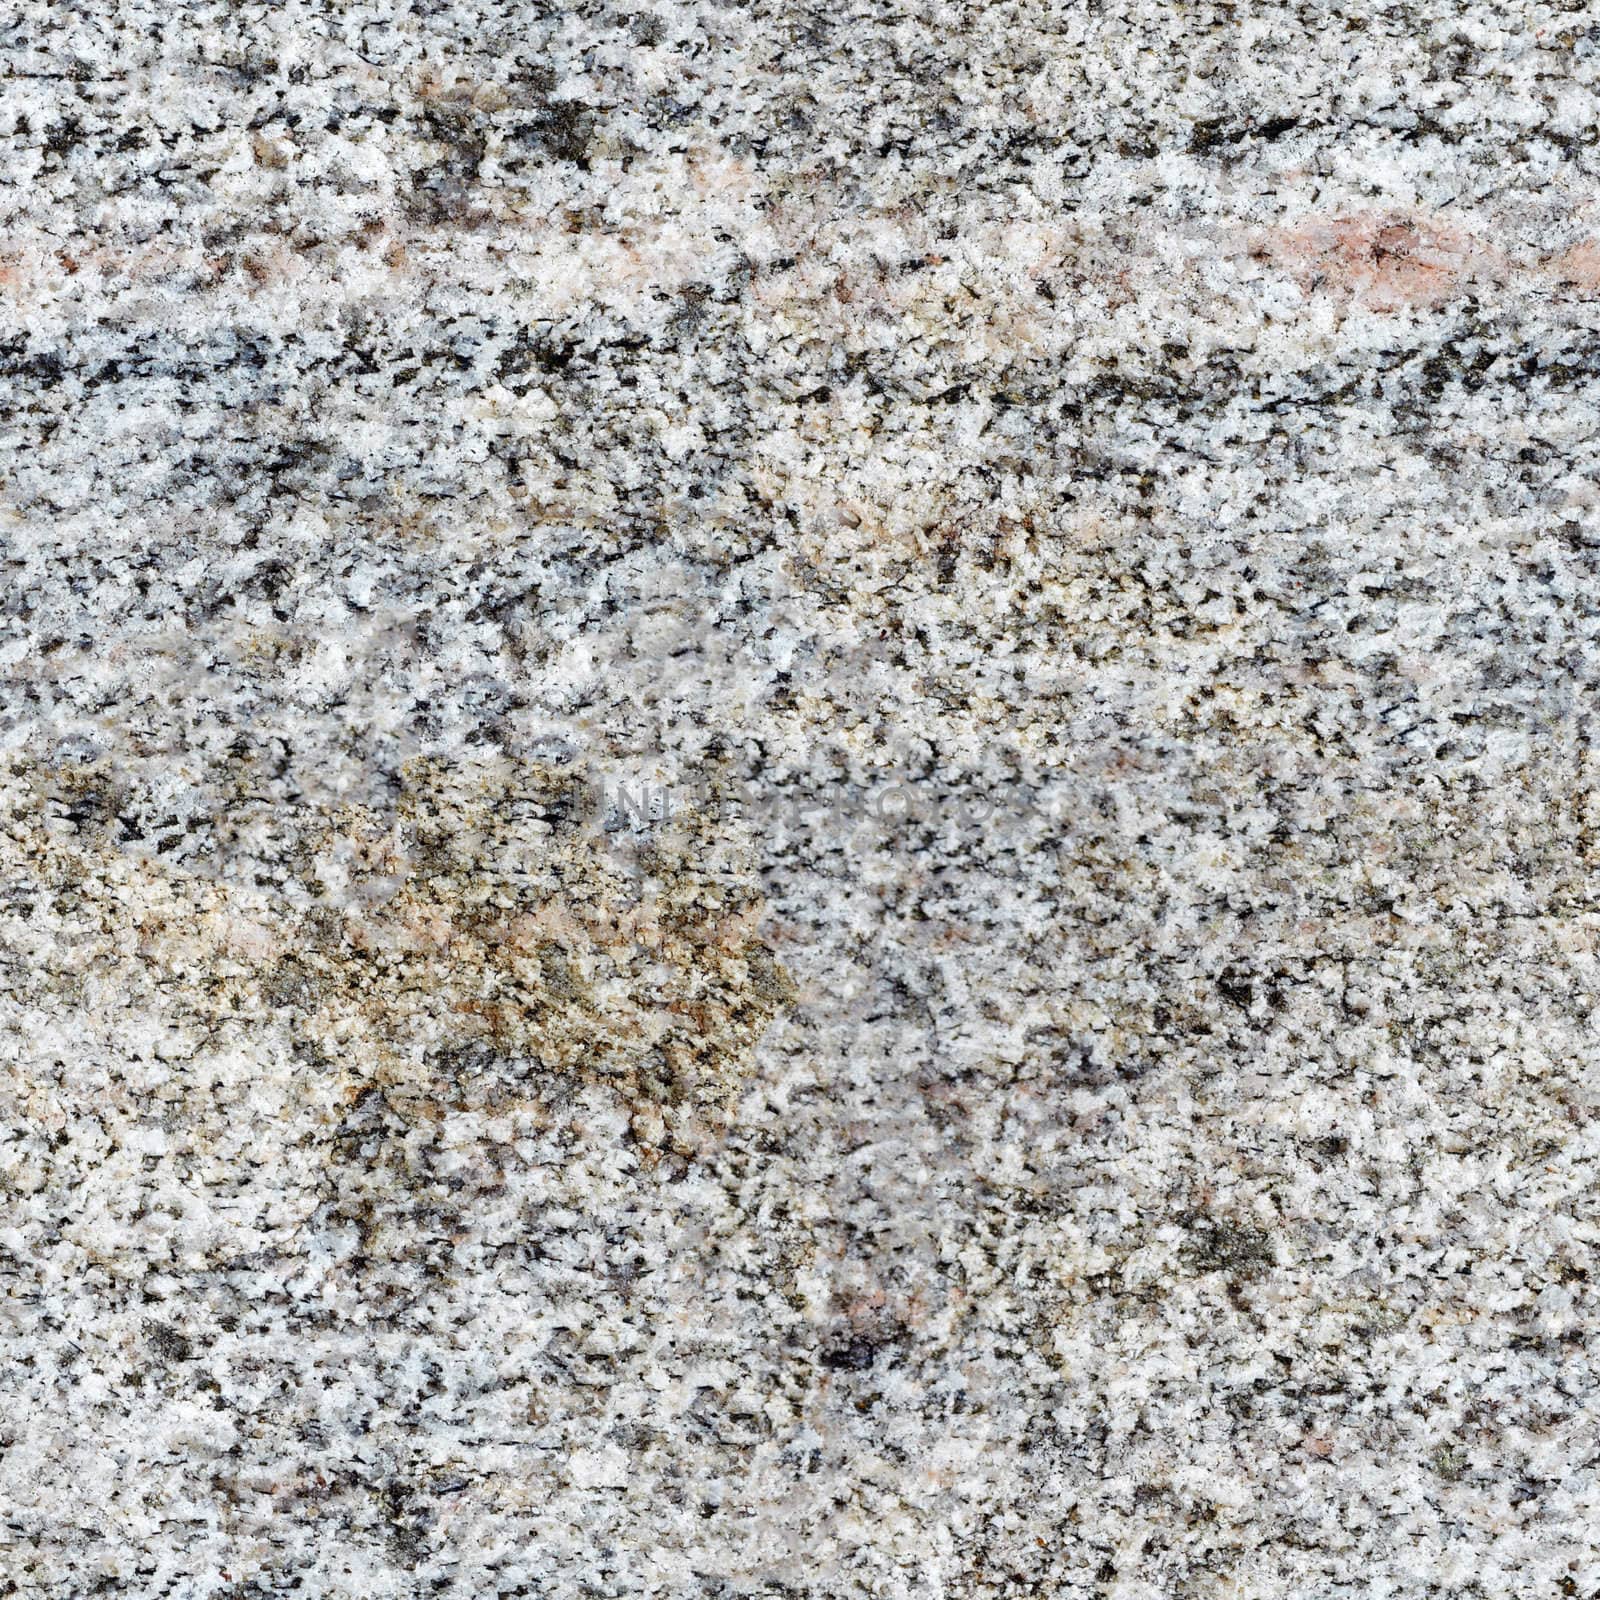 Seamless texture - surface of rough granite by pzaxe